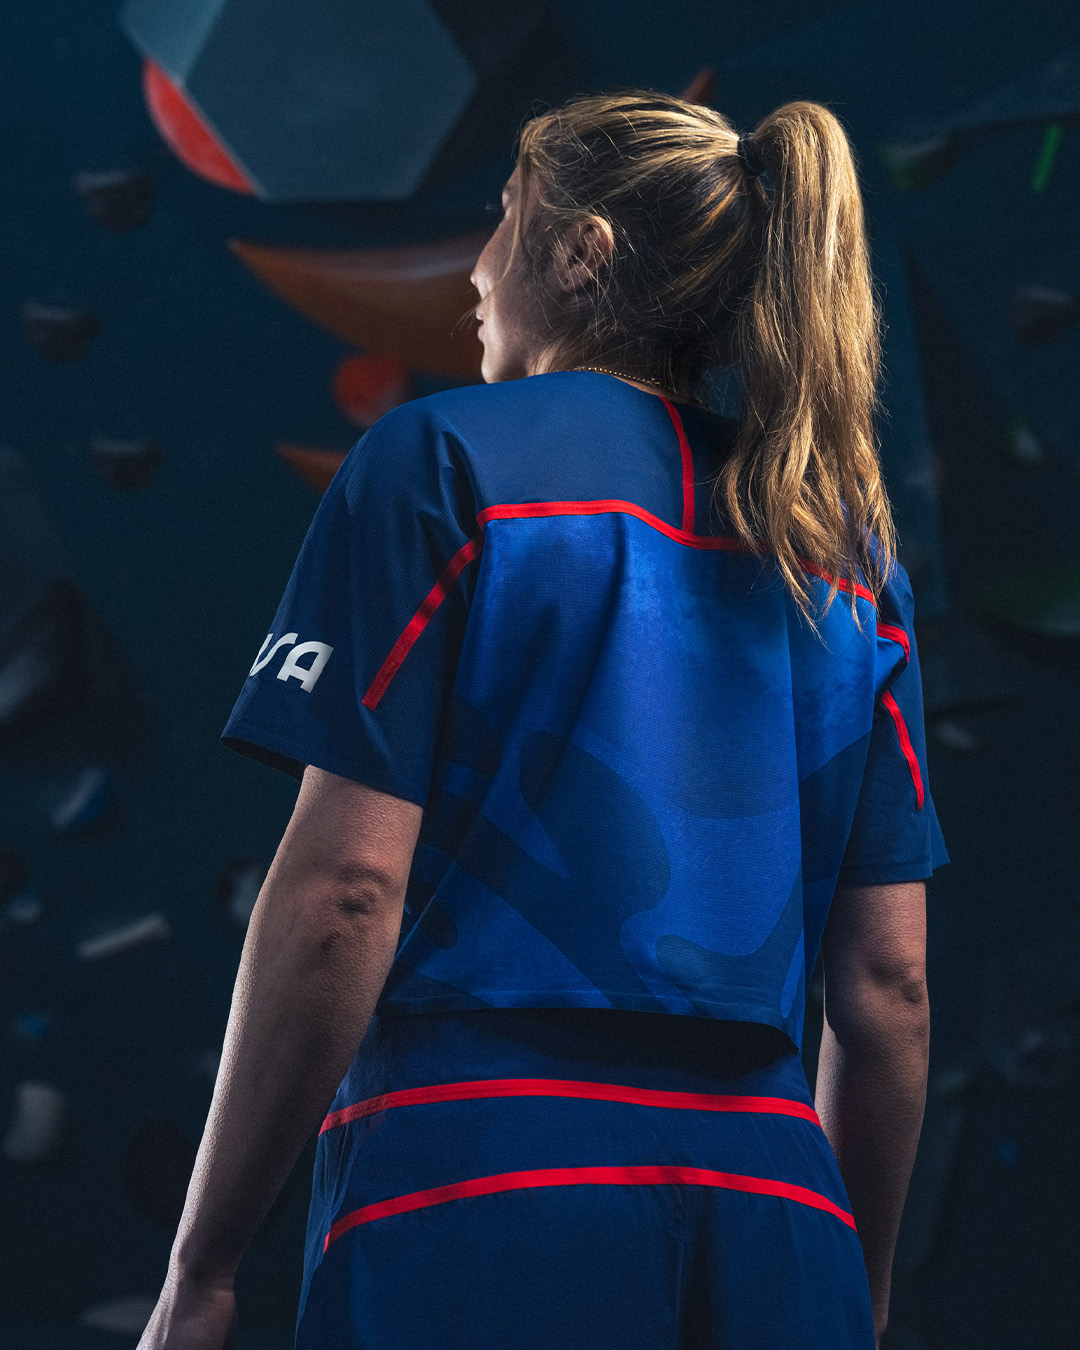 Woman in sportswear with ponytail standing in front of climbing wall, facing away